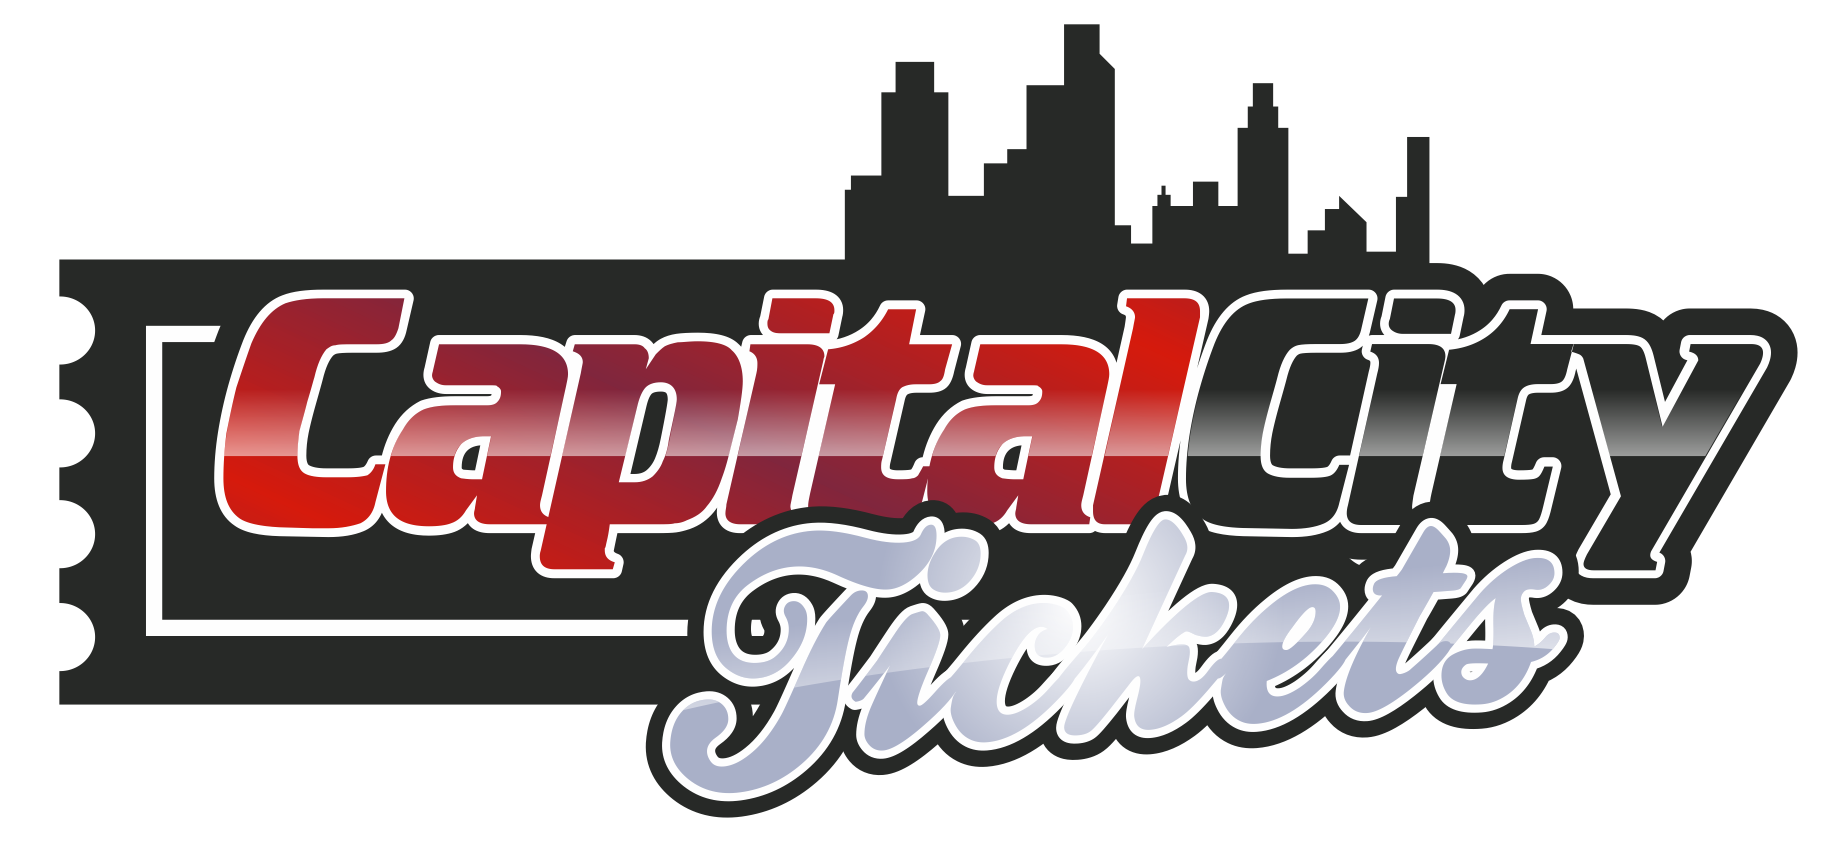 Discount Philadelphia Eagles Lower Level Tickets, Upper Level Seating, Club Seats, and Parking for their 2018 NFL Games at Capital City Tickets with Promo Code CITY5 3